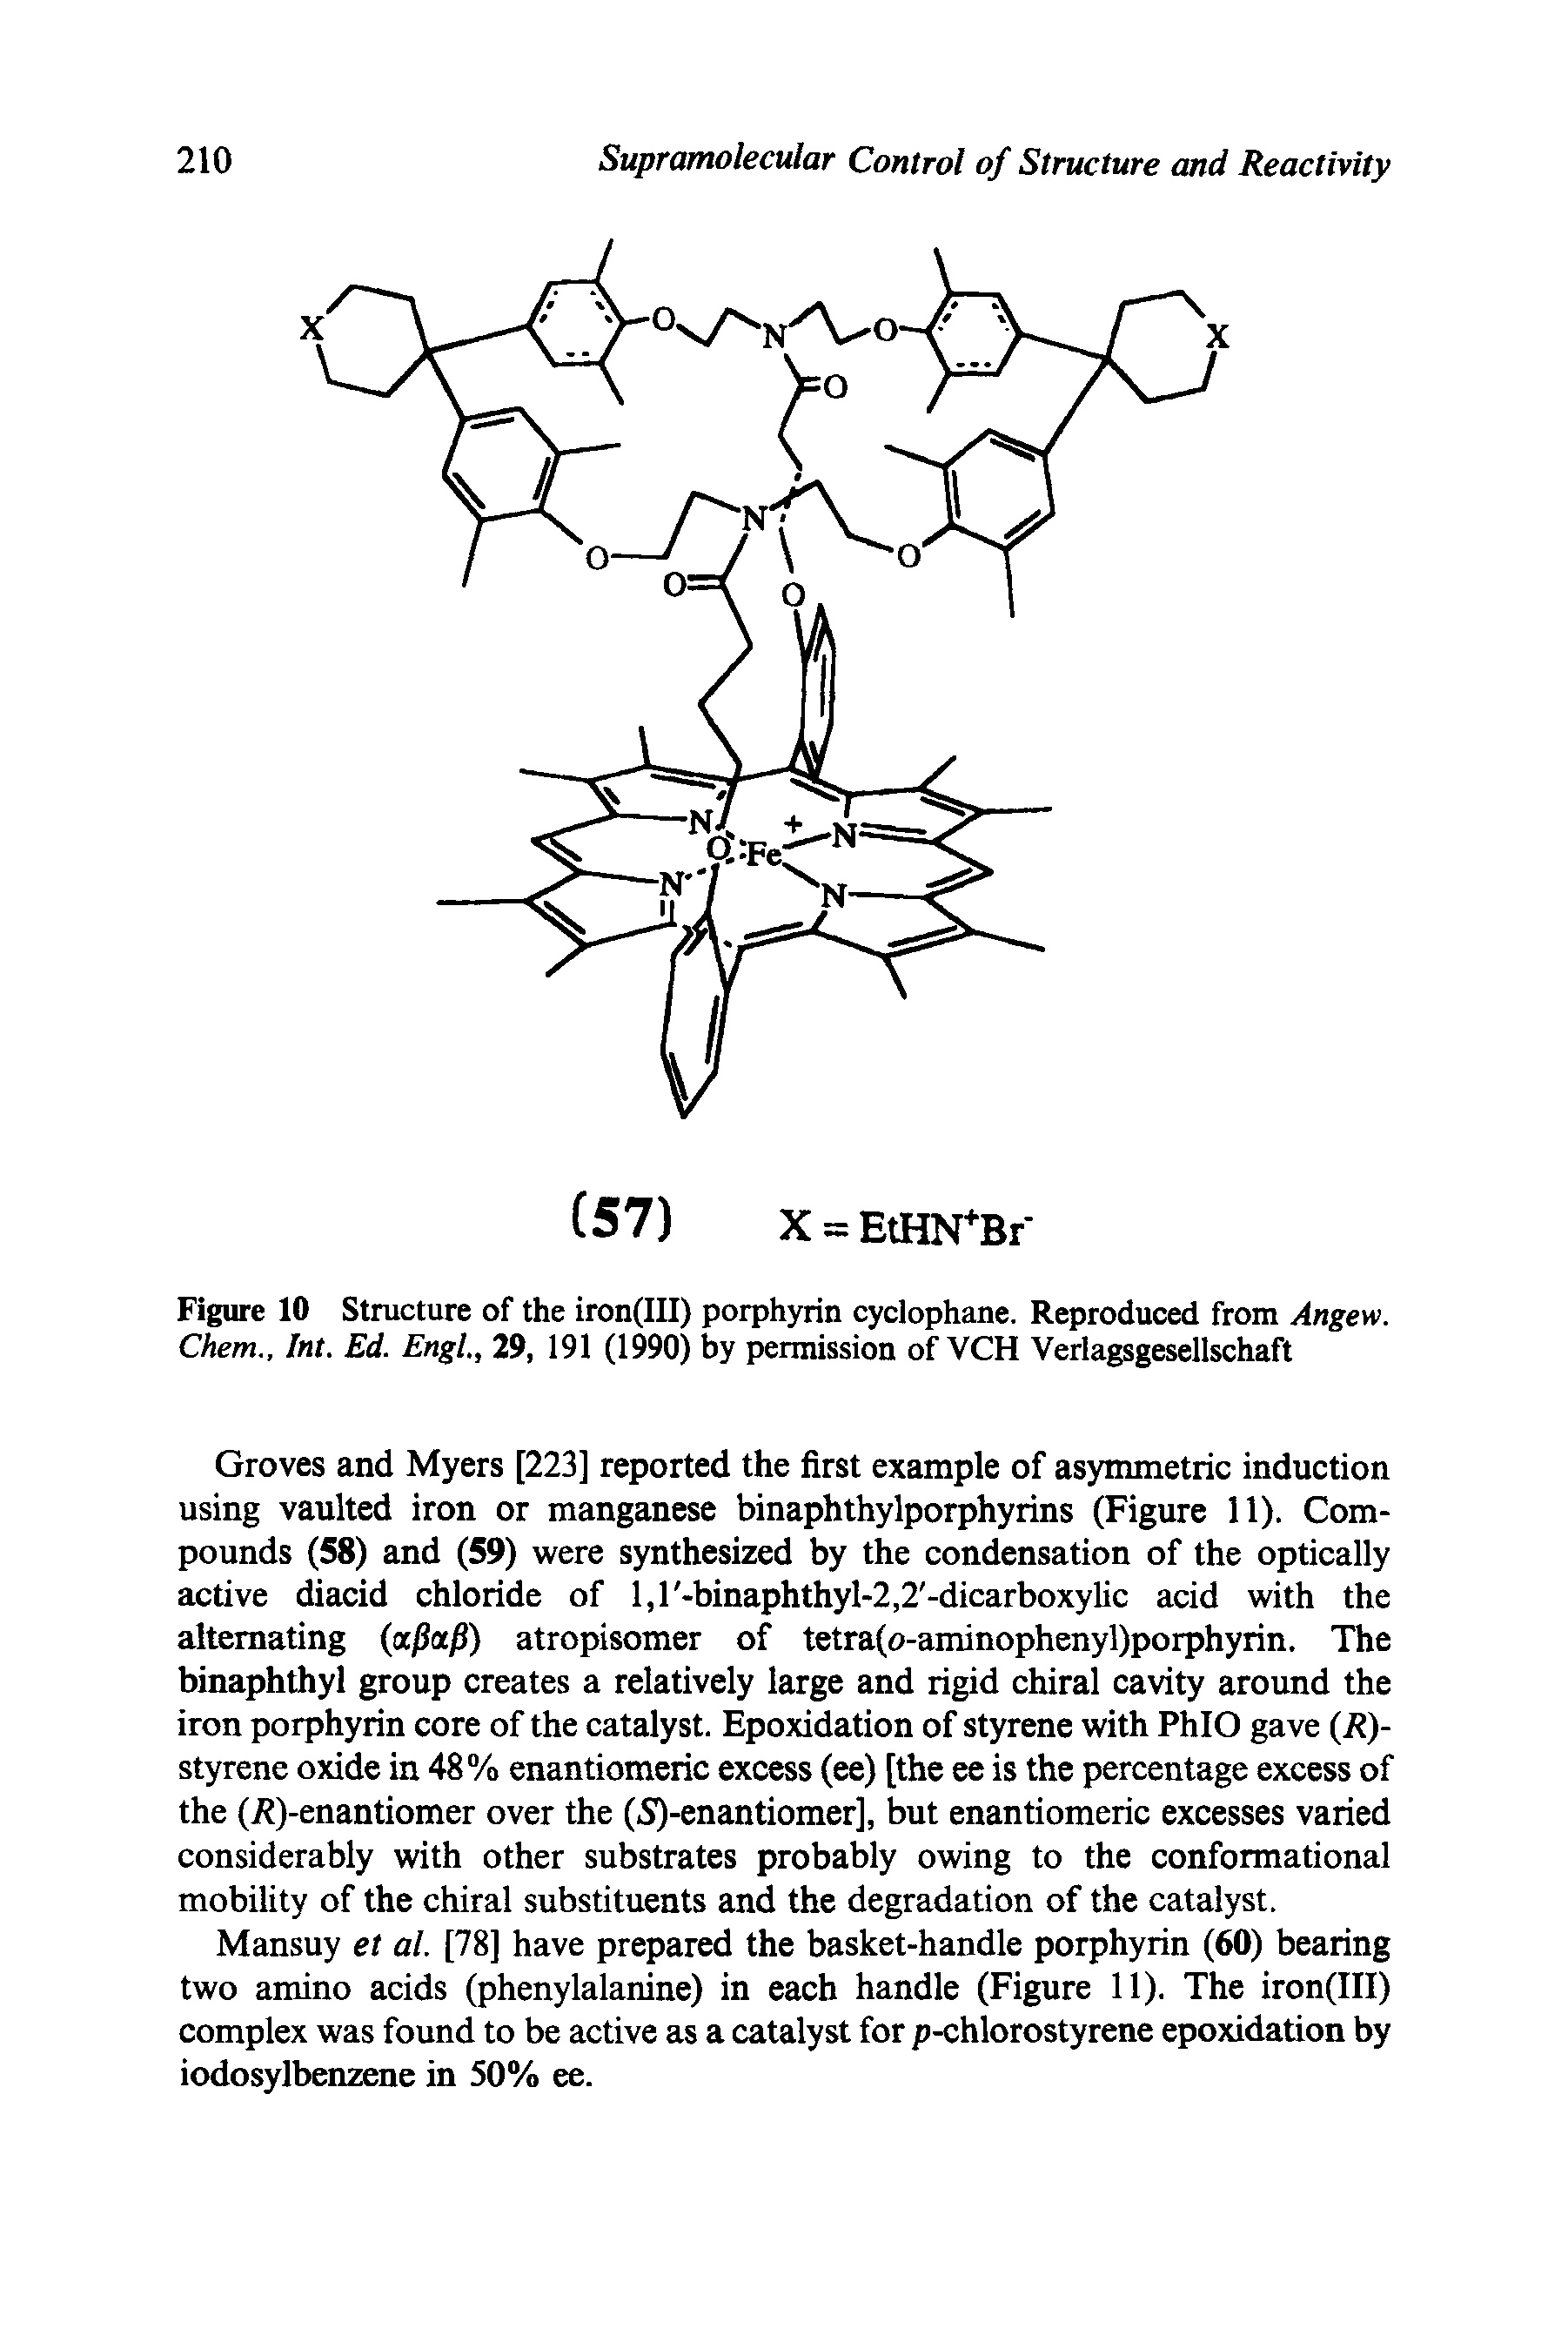 Figure 10 Structure of the iron(III) porphyrin cyclophane. Reproduced from Angew. Chem., Int. Ed. Engl., 29, 191 (1990) by pennission of VCH Verlagsgesellschaft...